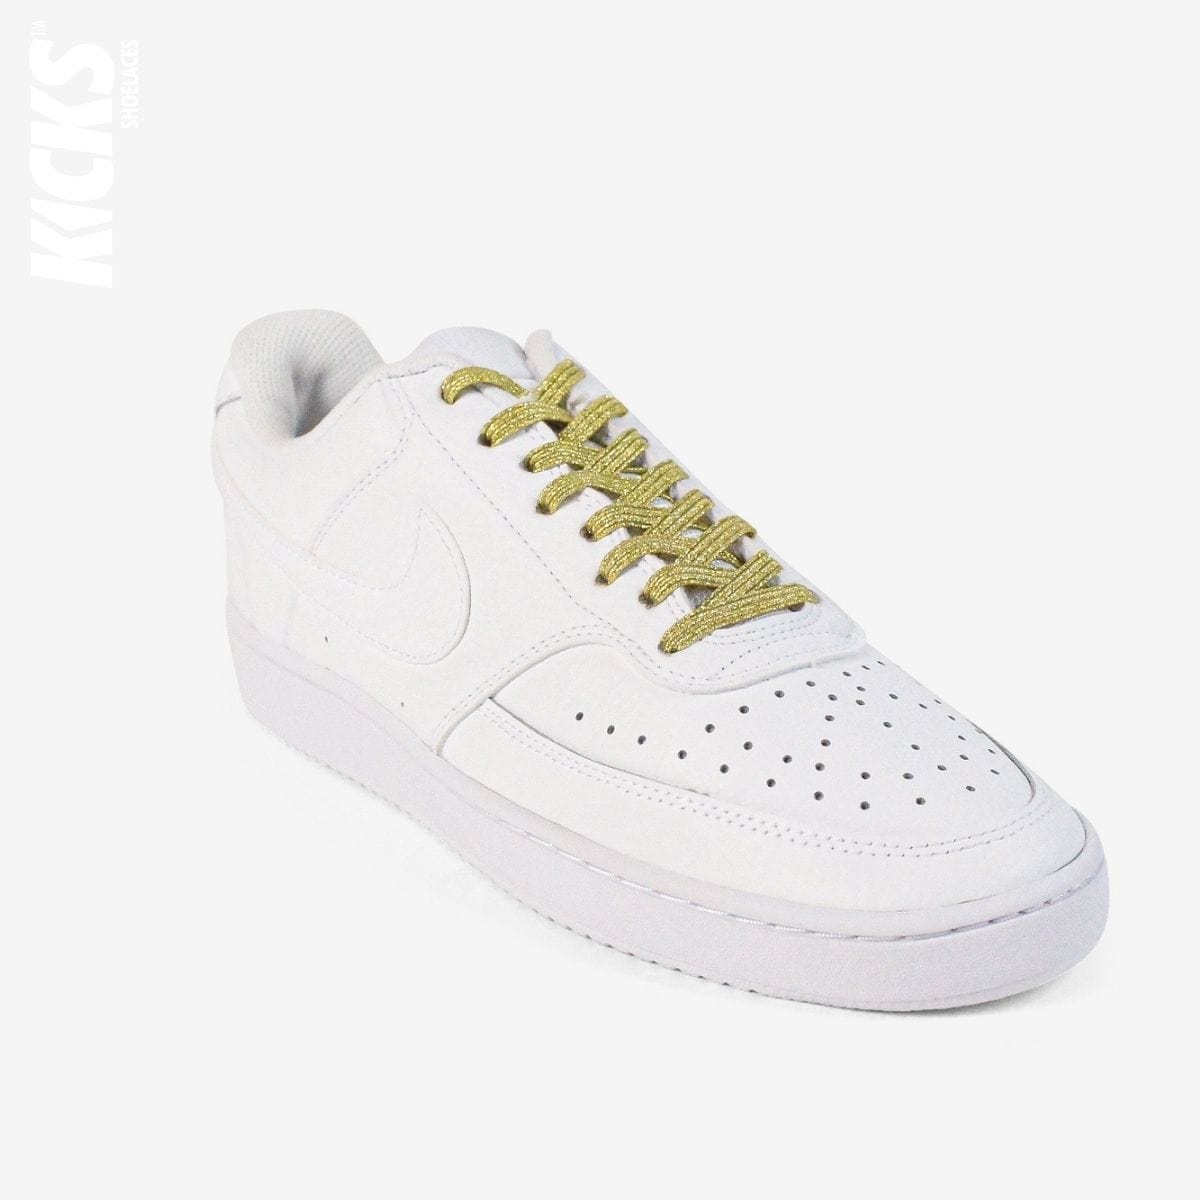 elastic-no-tie-shoelaces-with-gold-laces-on-nike-white-sneakers